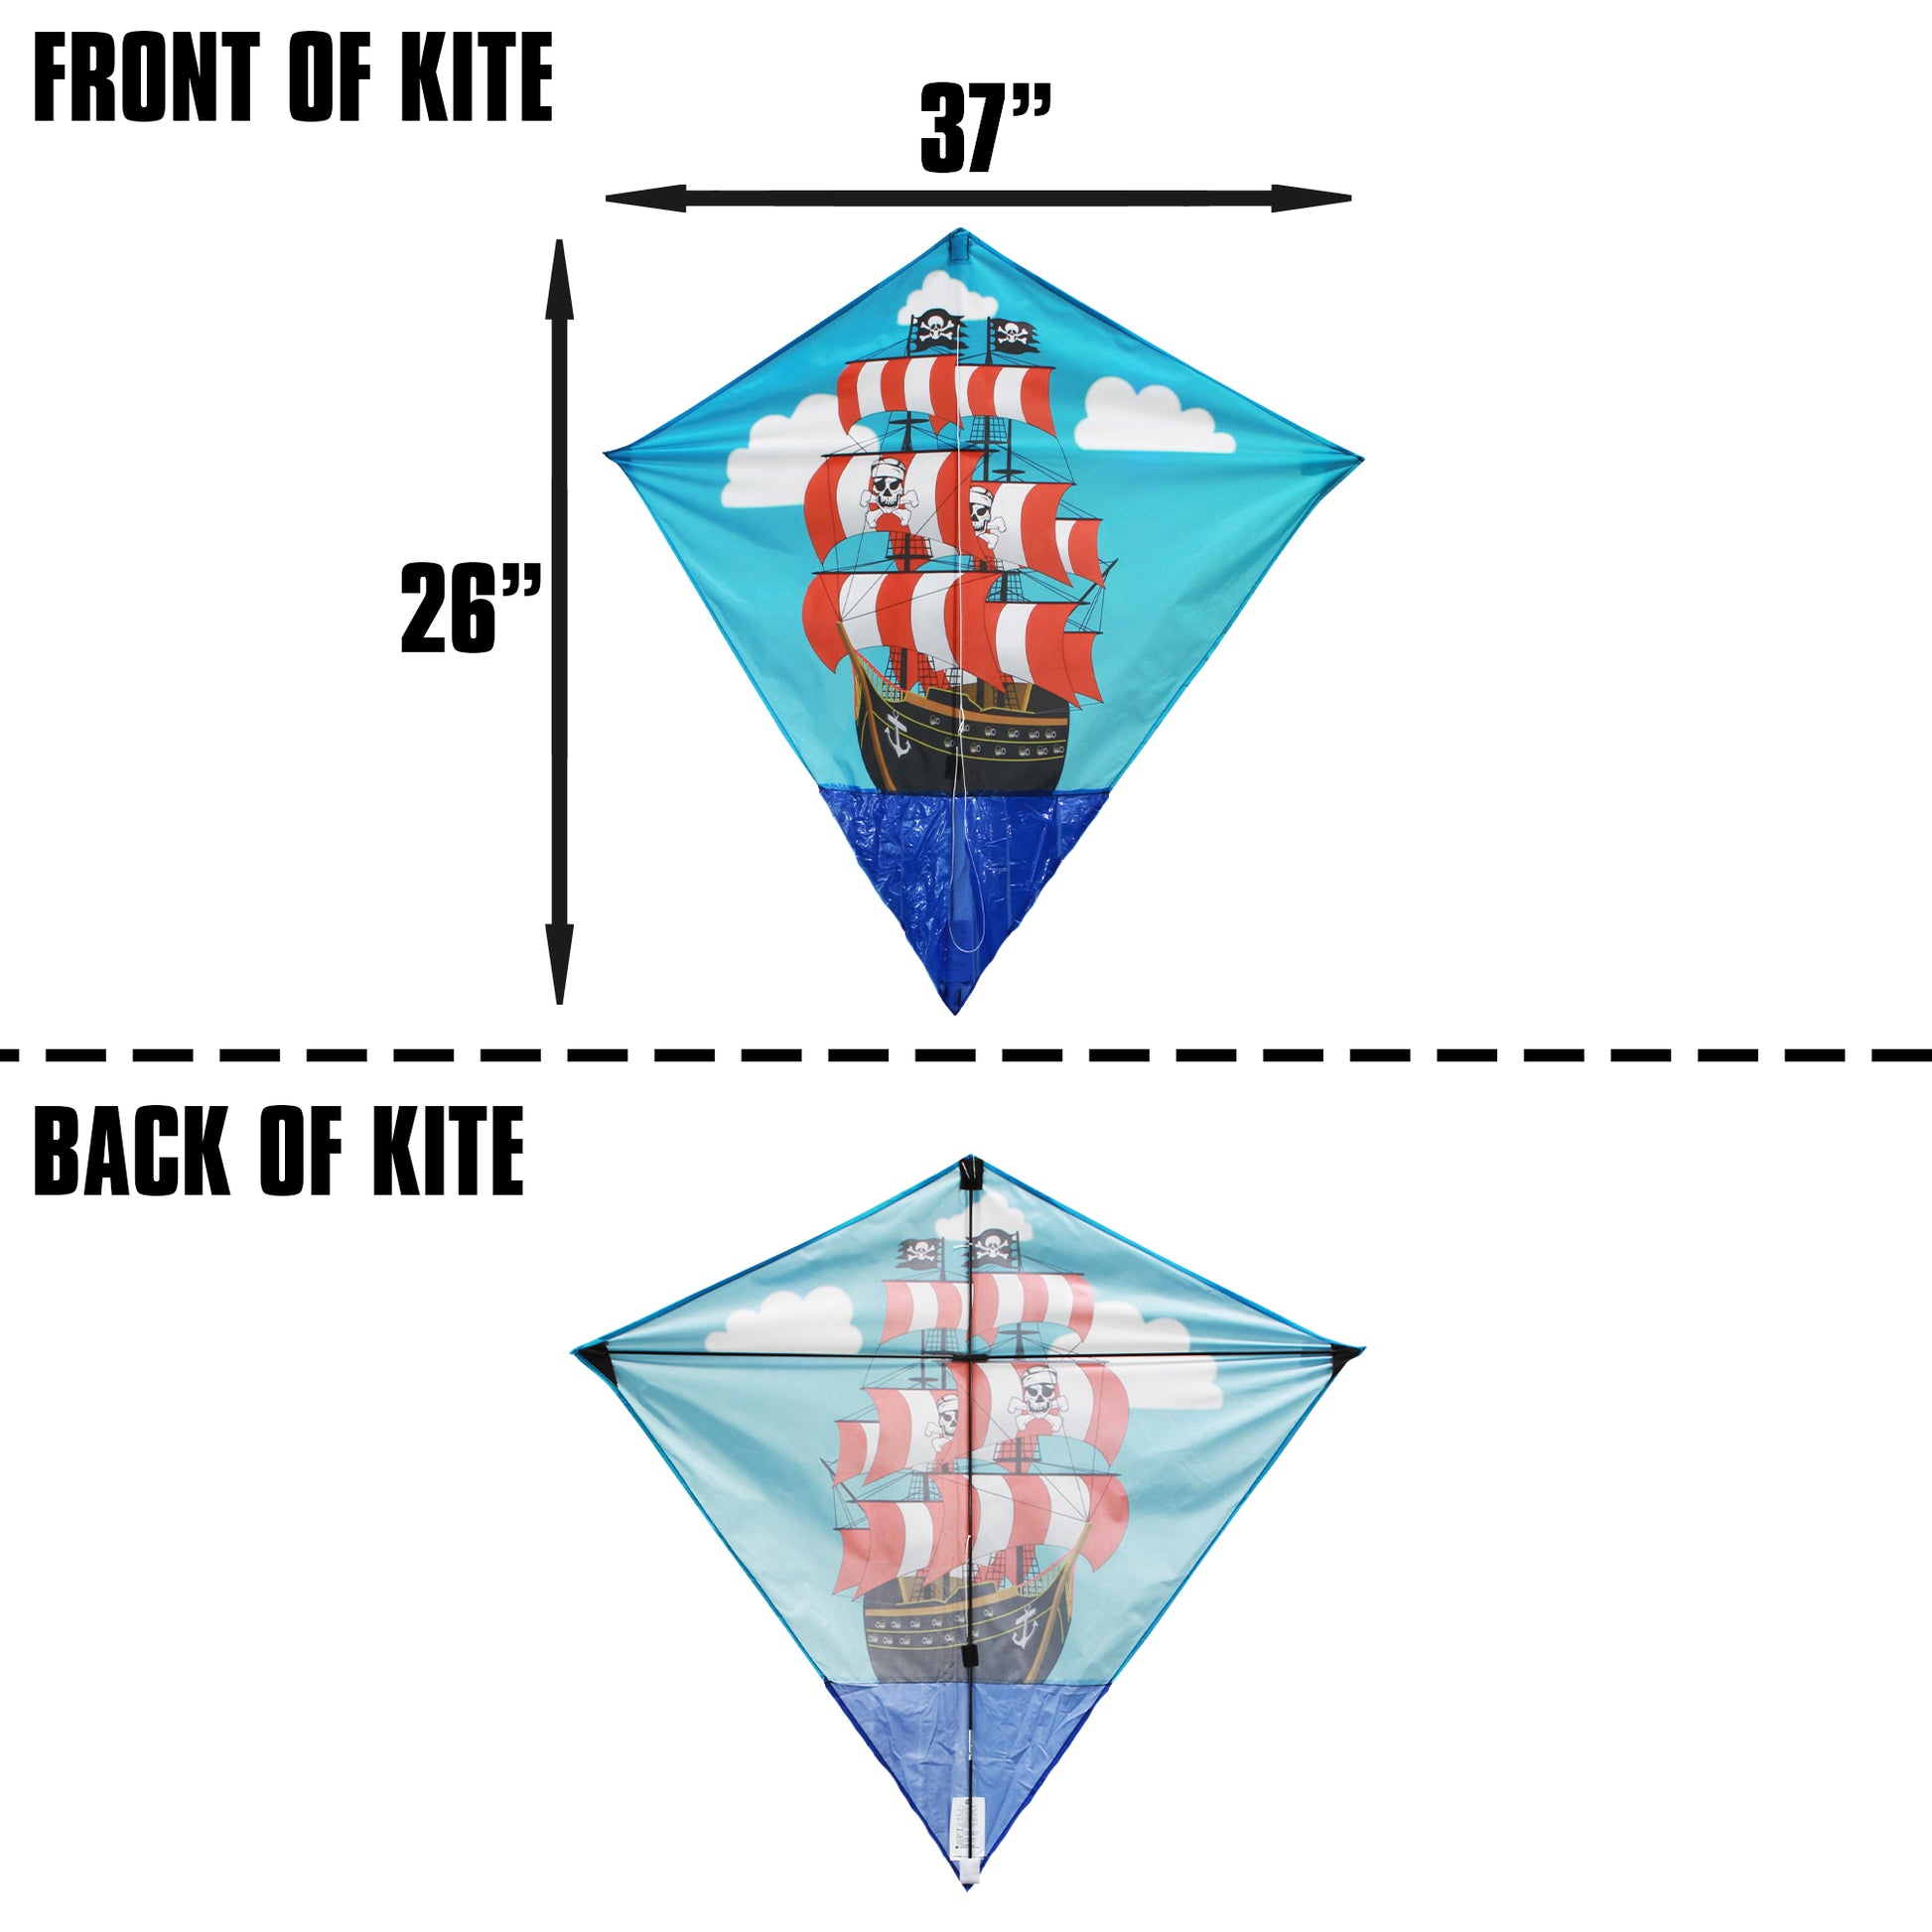 X Kites StratoKite PirateShip Nylon Deluxe Tail Diamond Kite Product Dimensions 37 inches wide by 26 inches tall